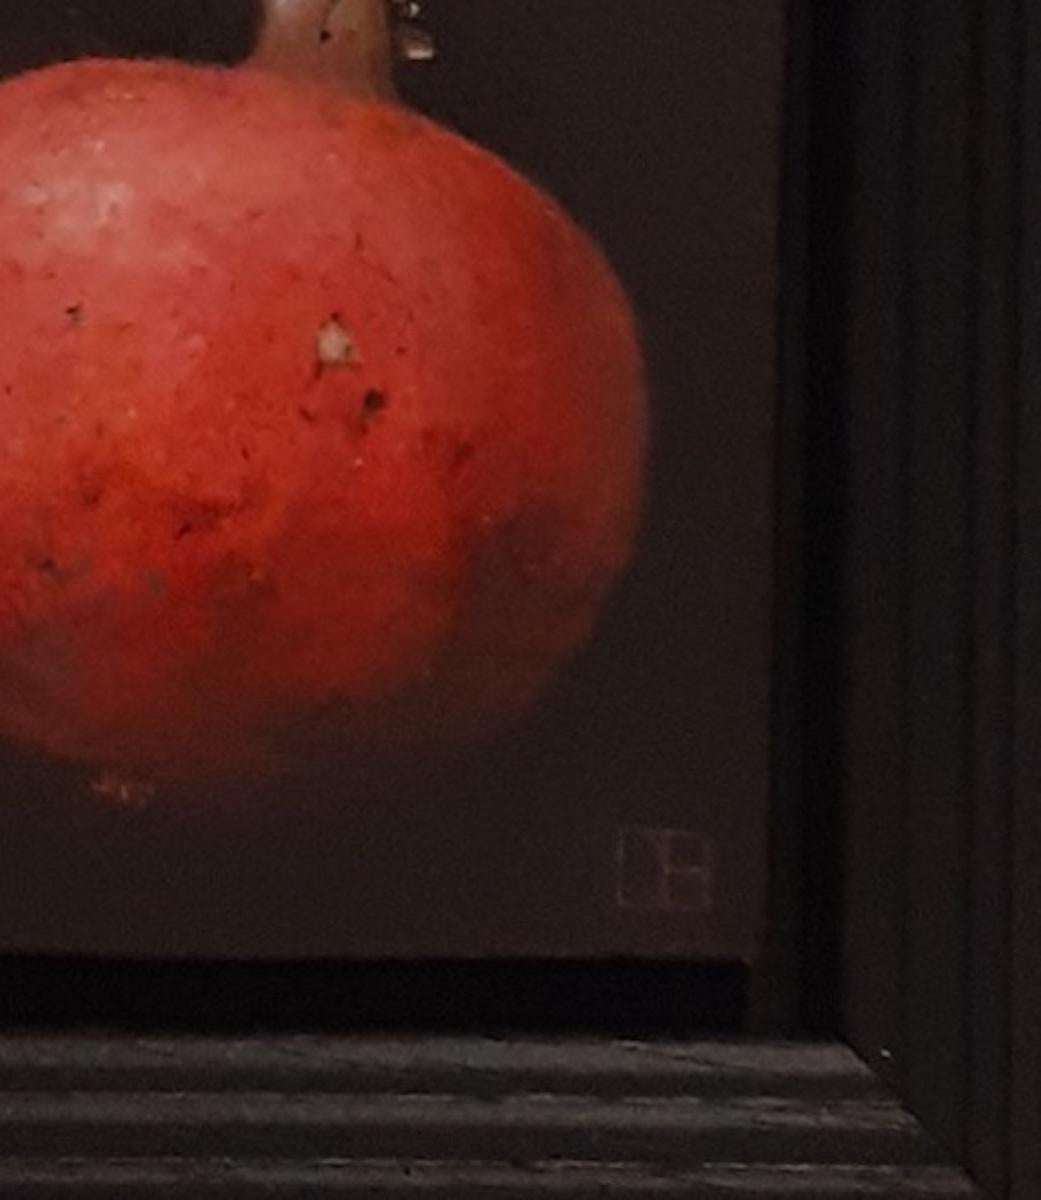 Pocket Bright Red Pomegranate Oil on Canvas Painting by Dani Humberstone, 2022 4